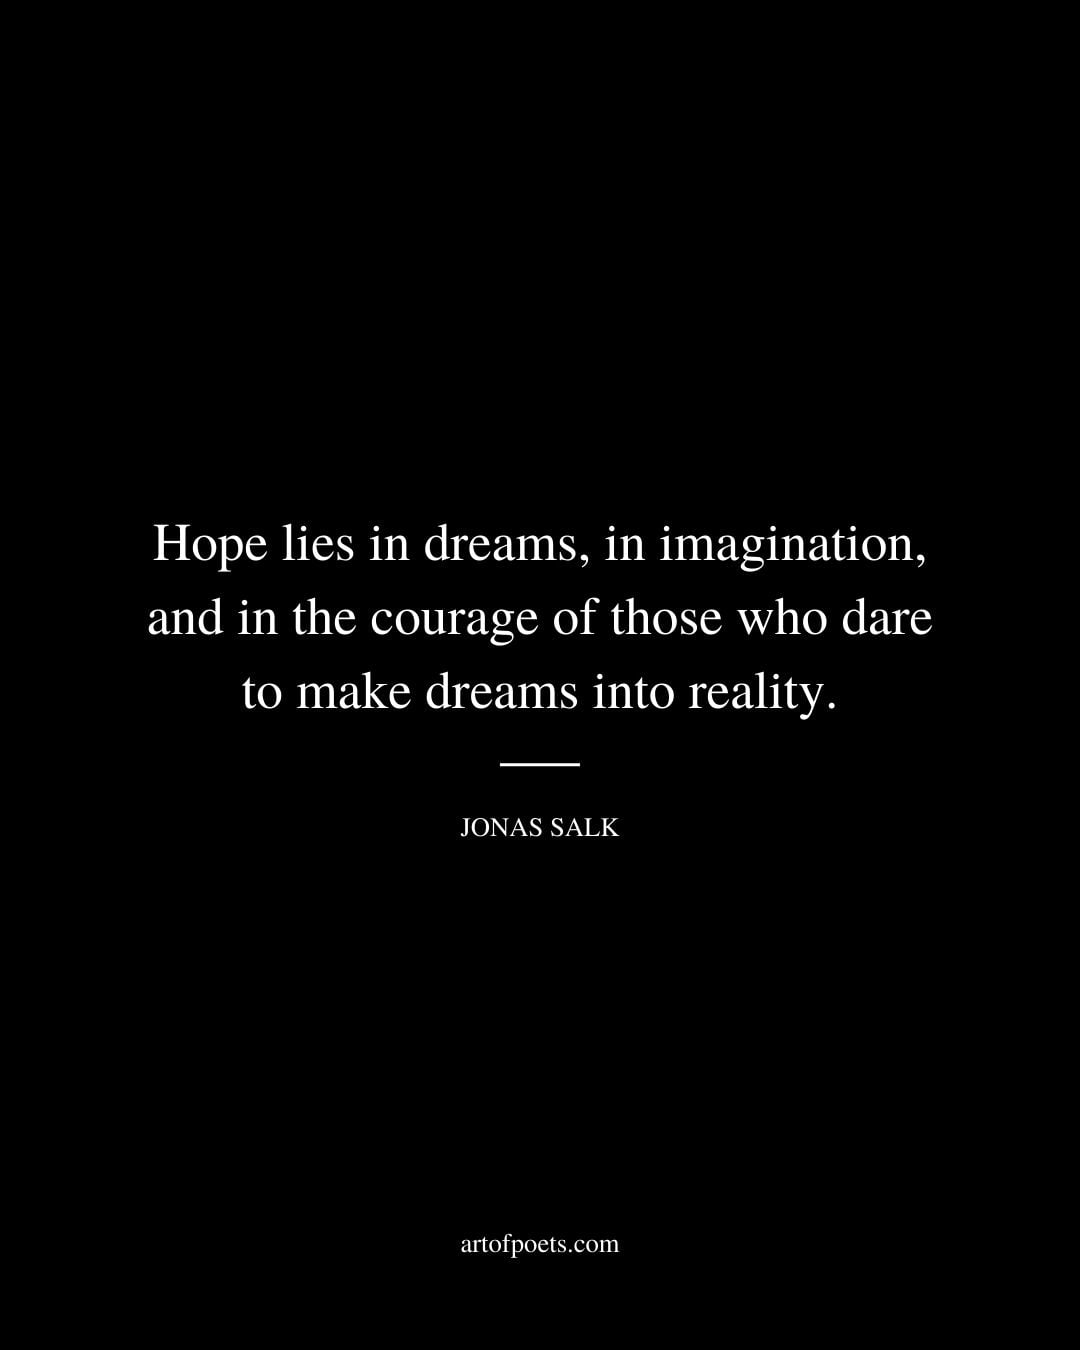 Hope lies in dreams in imagination and in the courage of those who dare to make dreams into reality. Jonas Salk